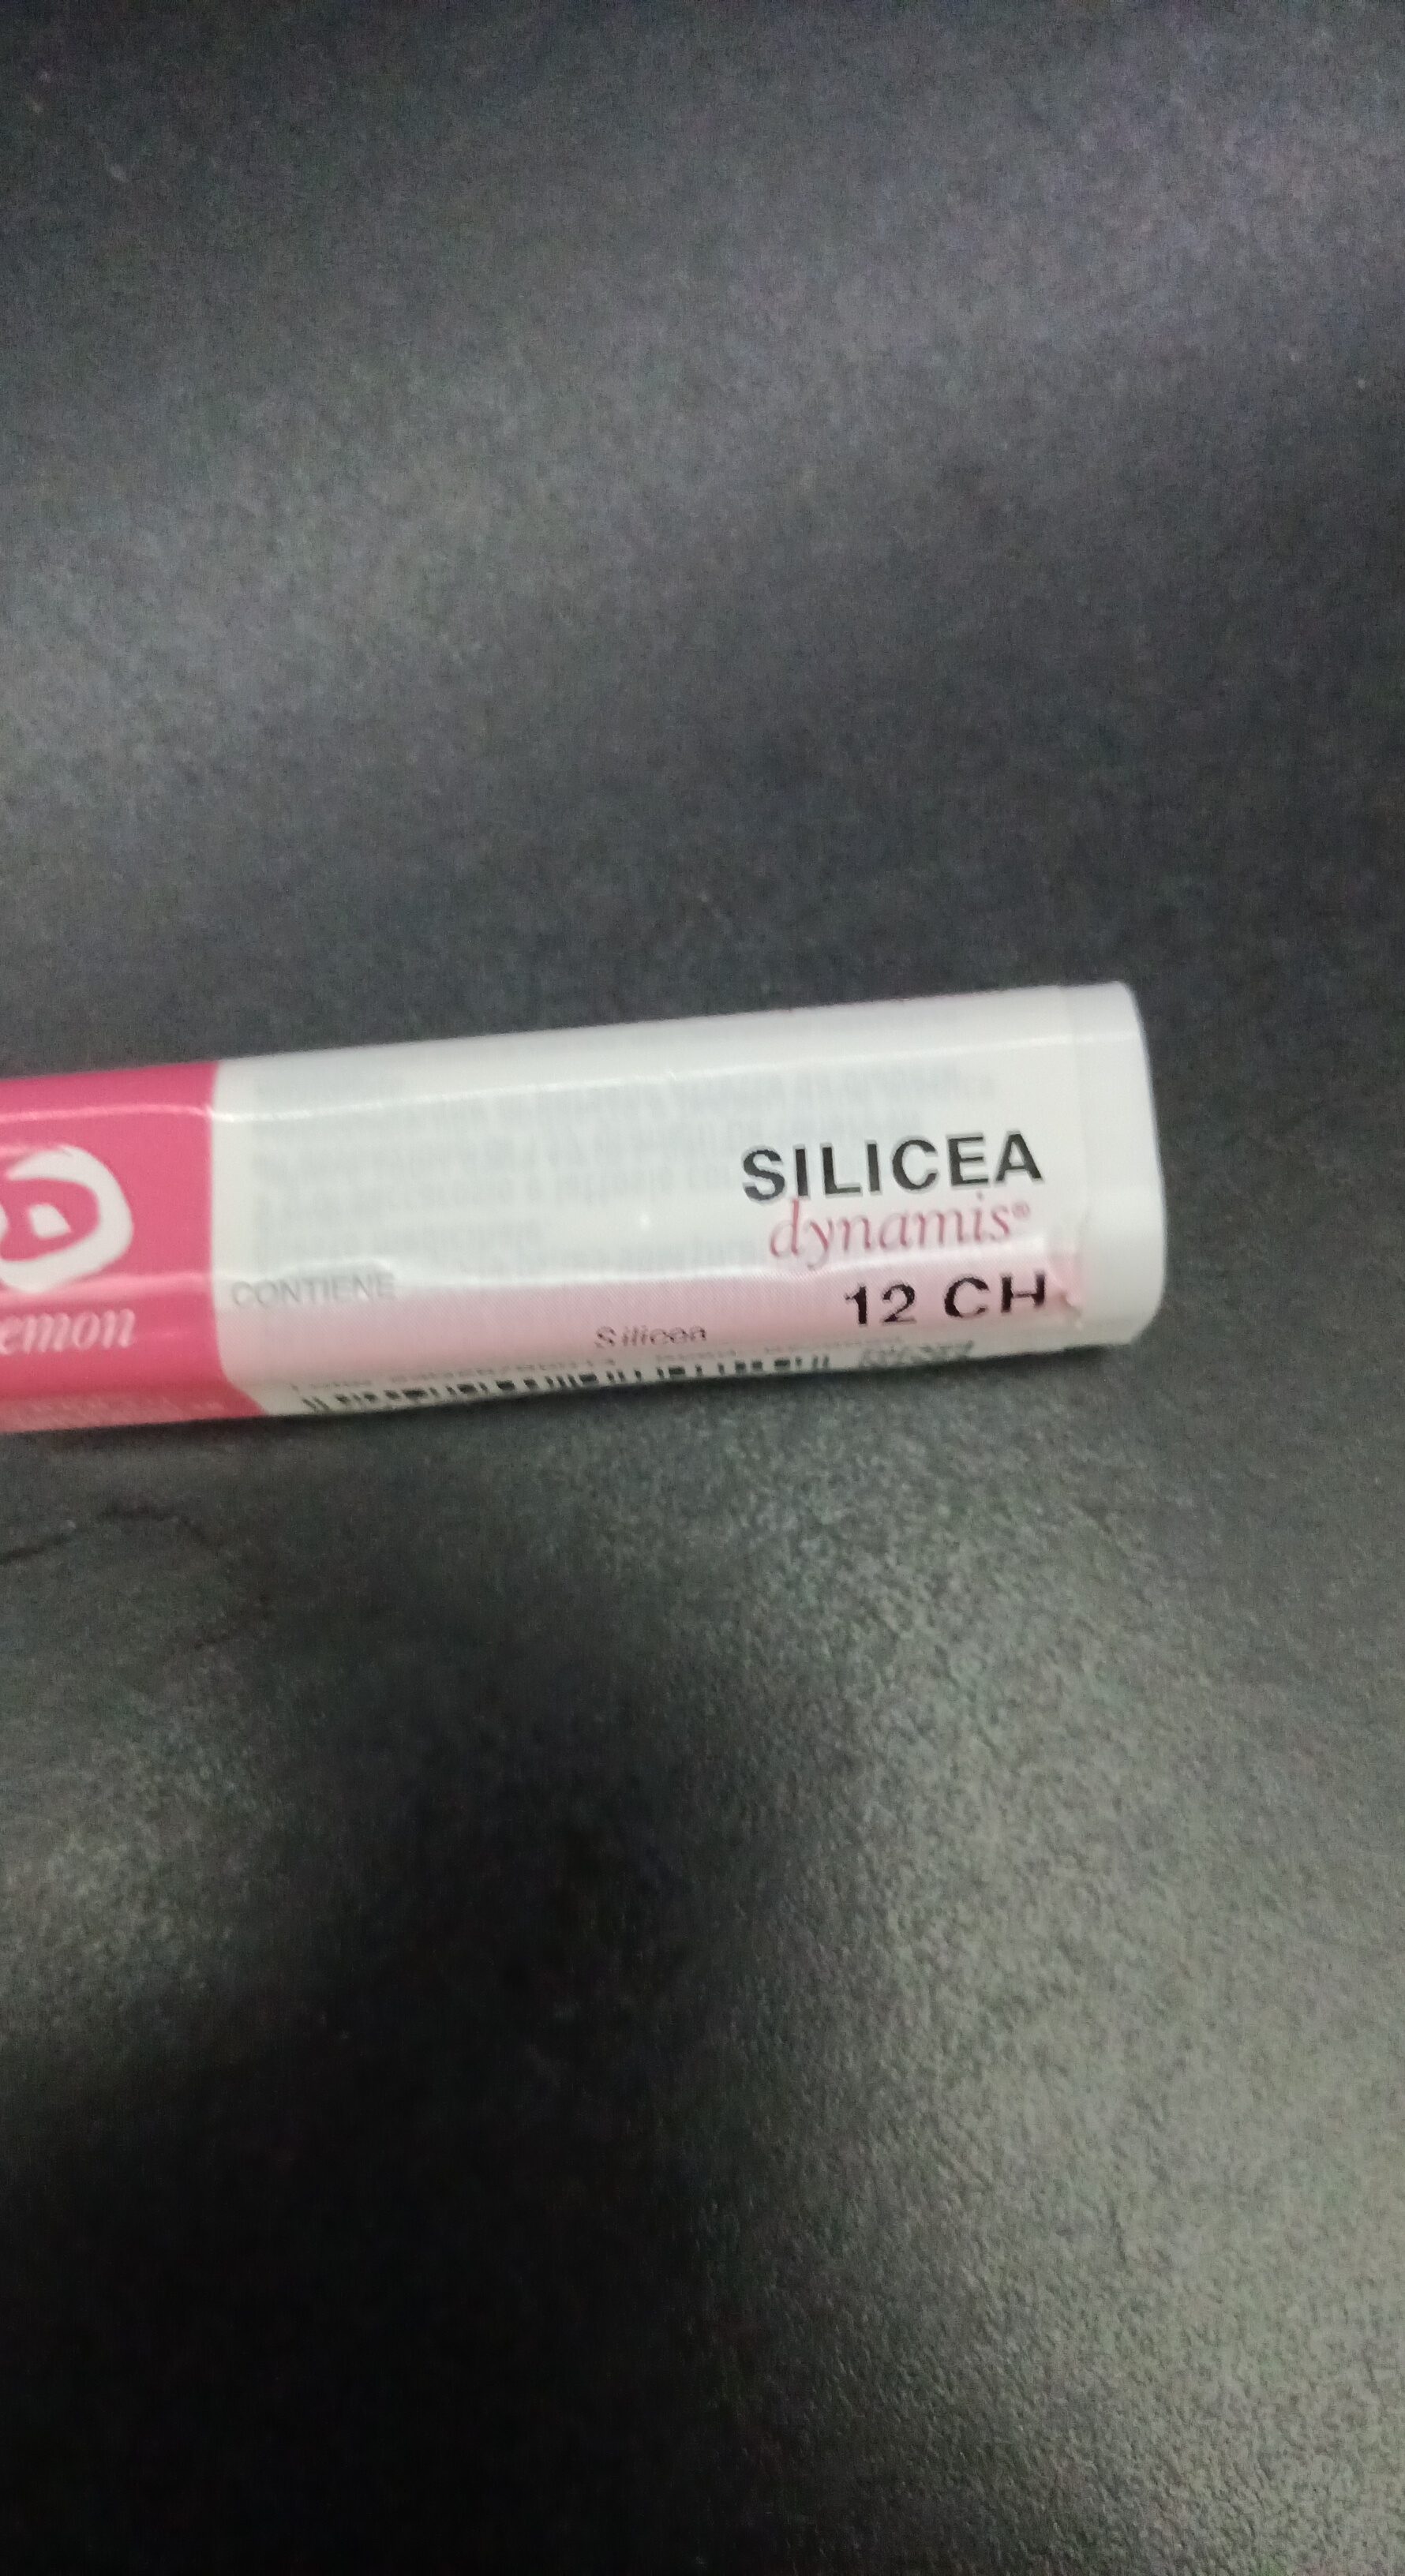 SILICEA 12CH - Product - it